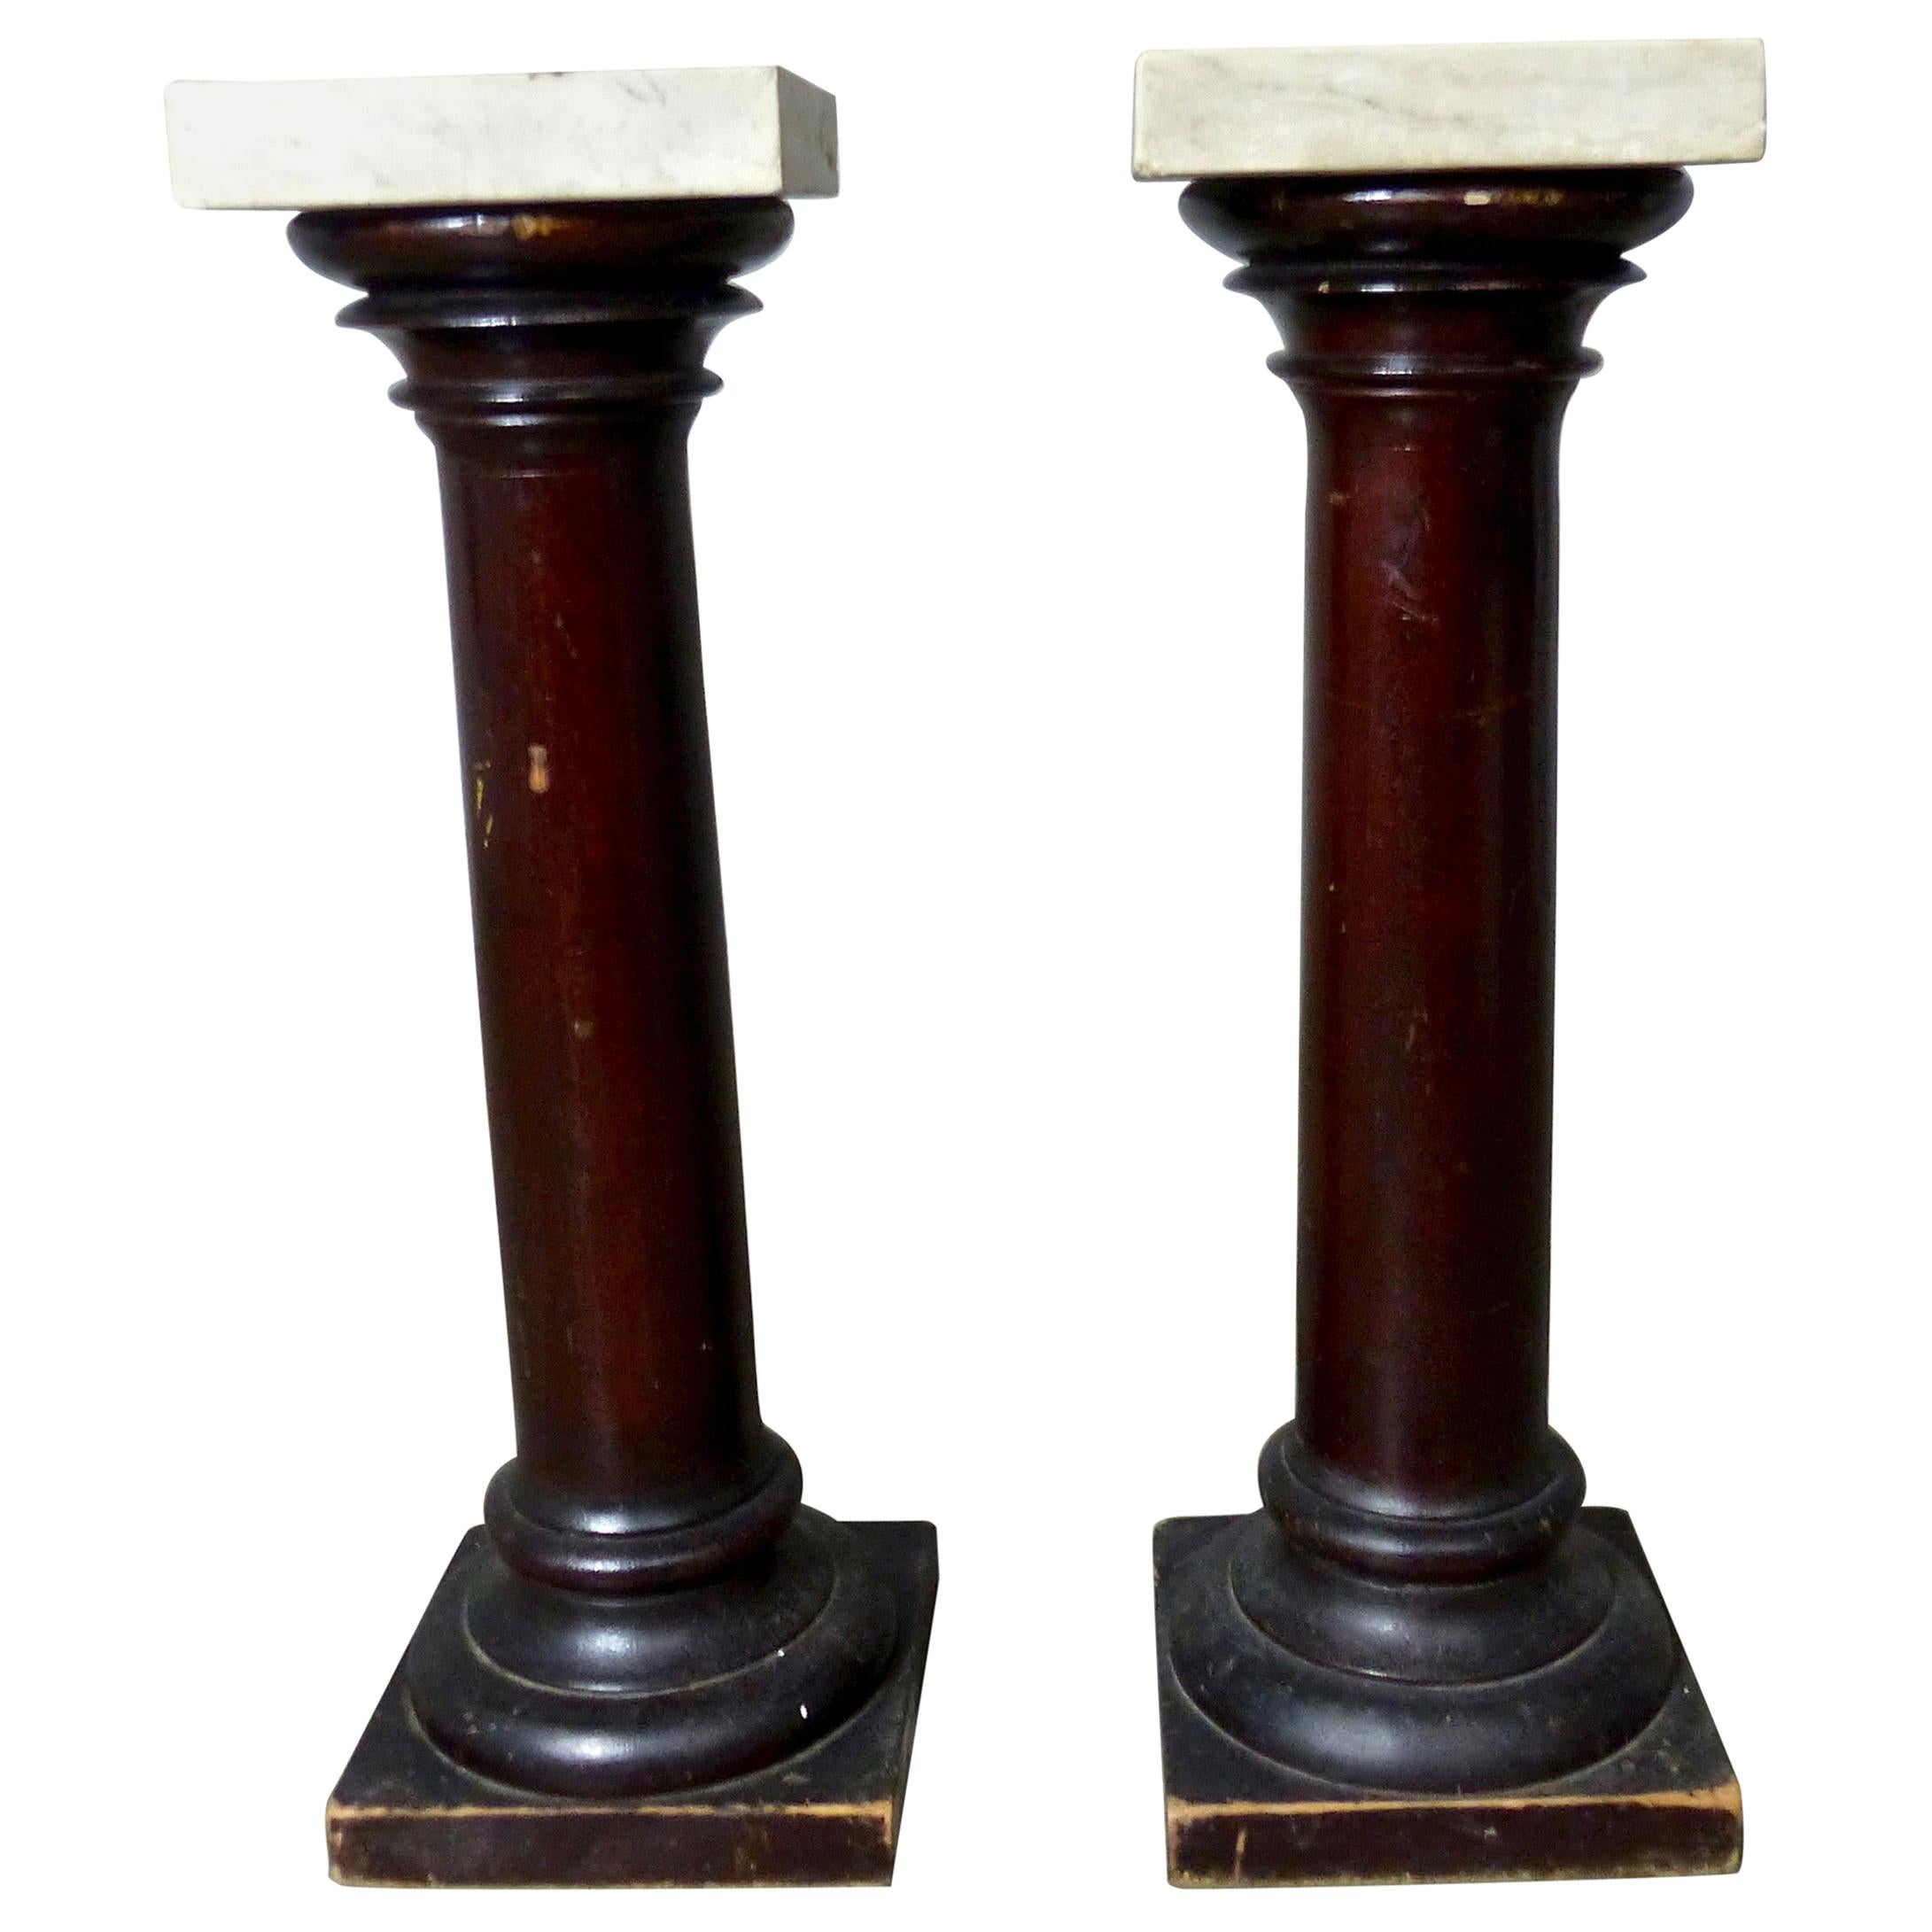 Wooden Pillars / Stands / Pedestals with Marble Tops, circa 1900